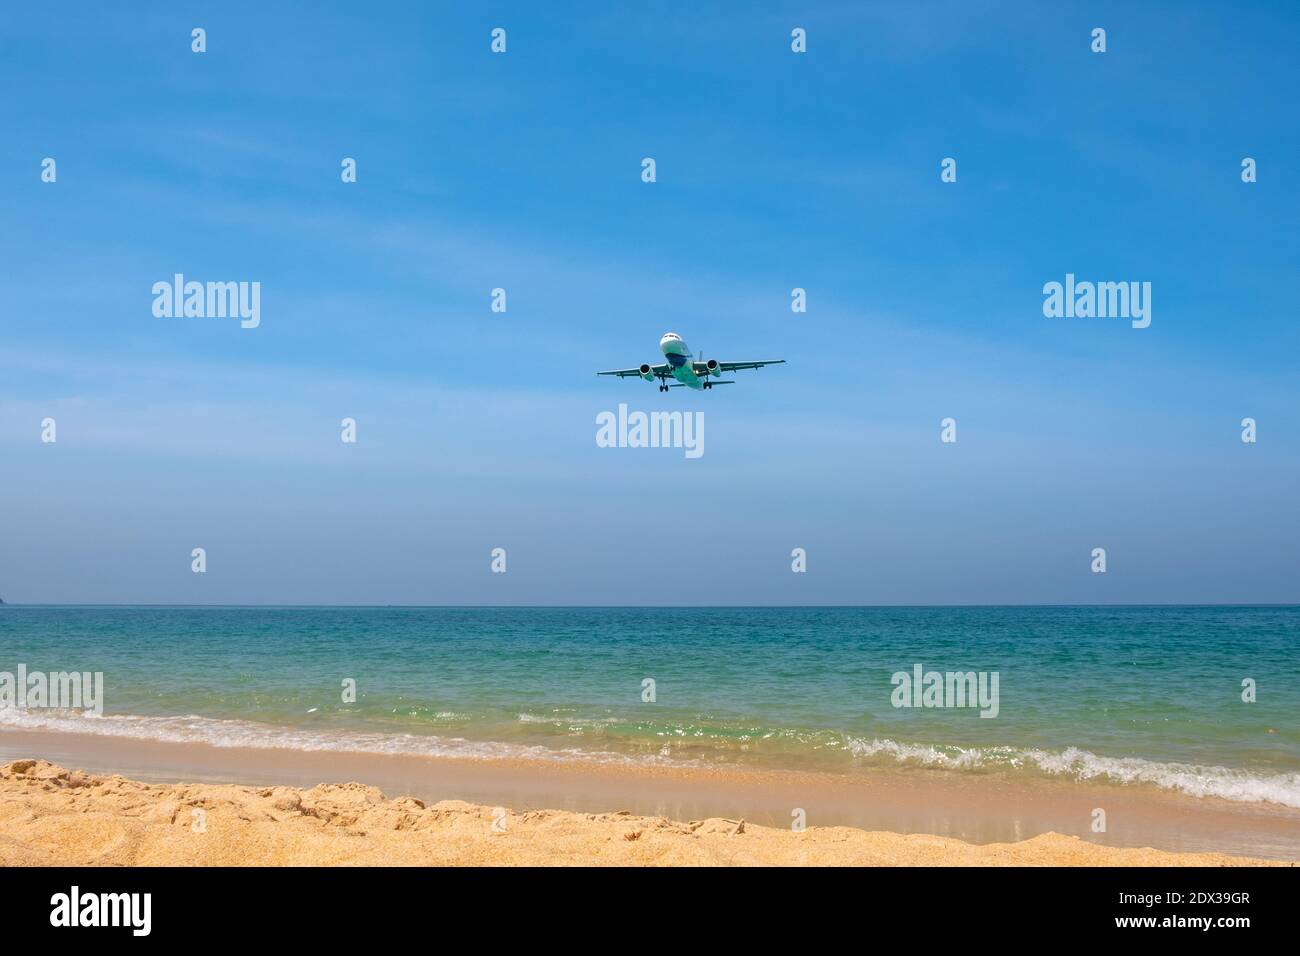 The plane comes in for landing flying over a beautiful tropical beach with fine sand and blue sea. Stock Photo